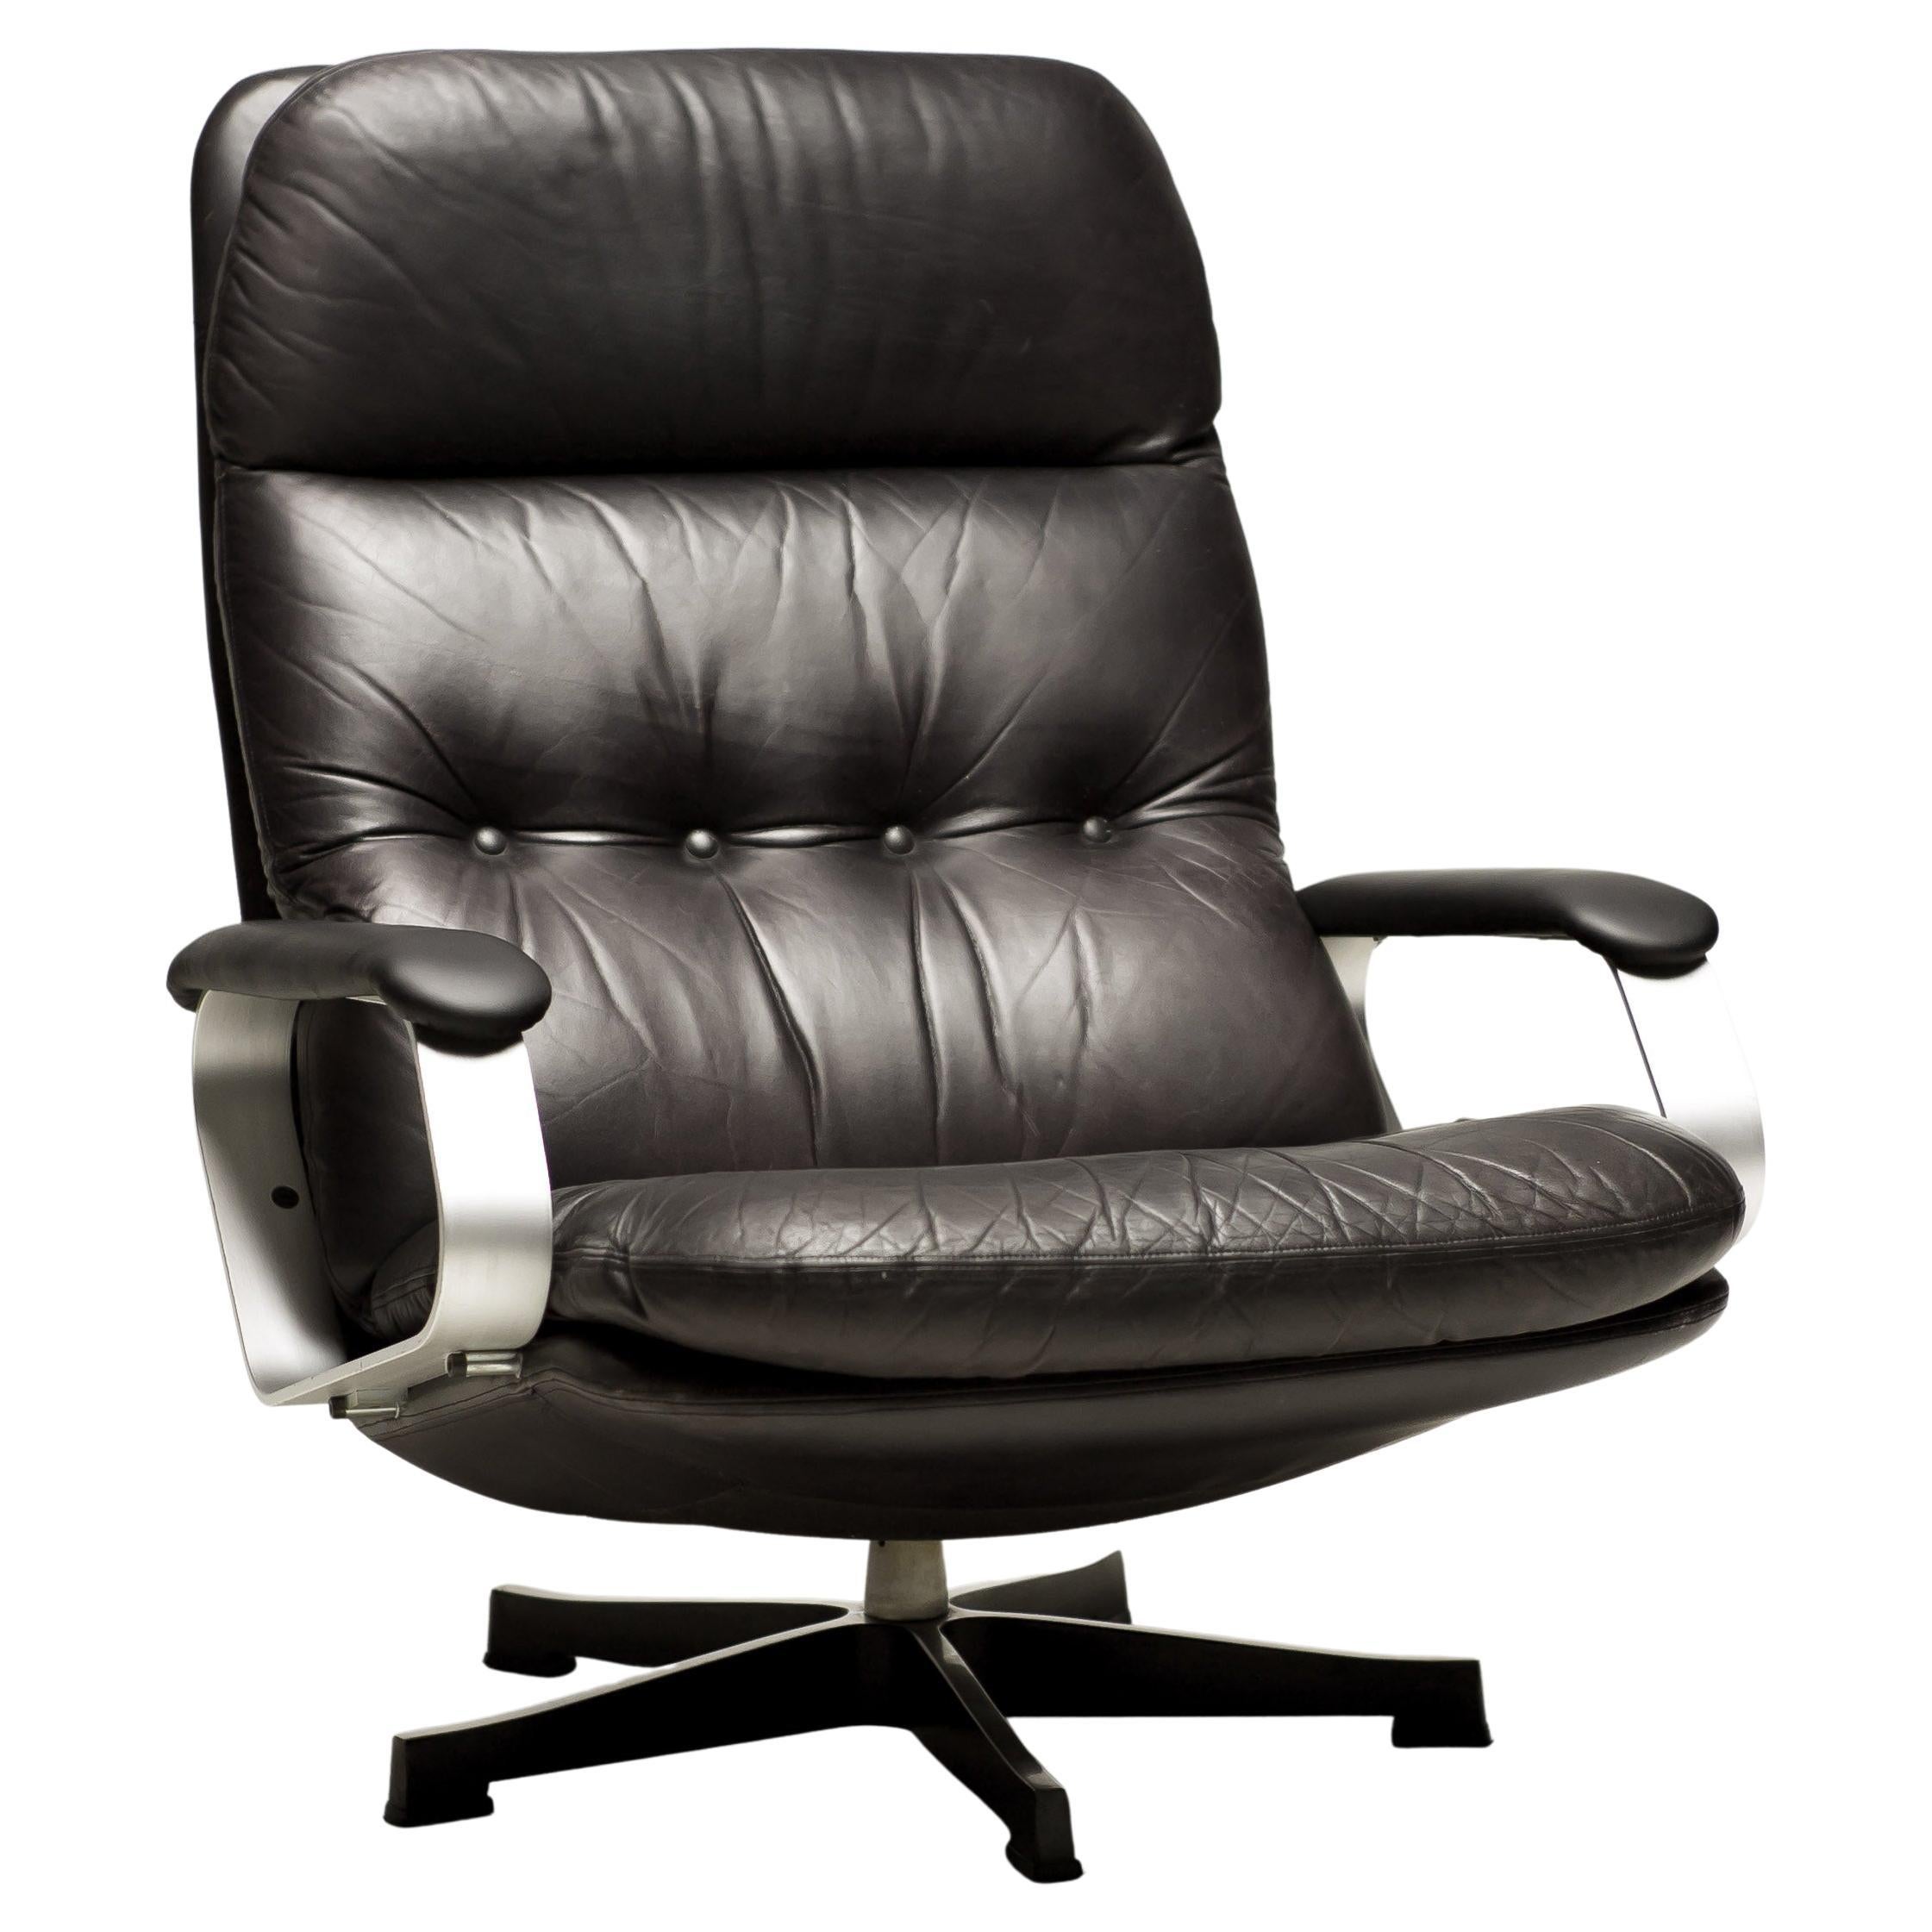 Black Leather Danish Lounge Chair For Sale at 1stDibs